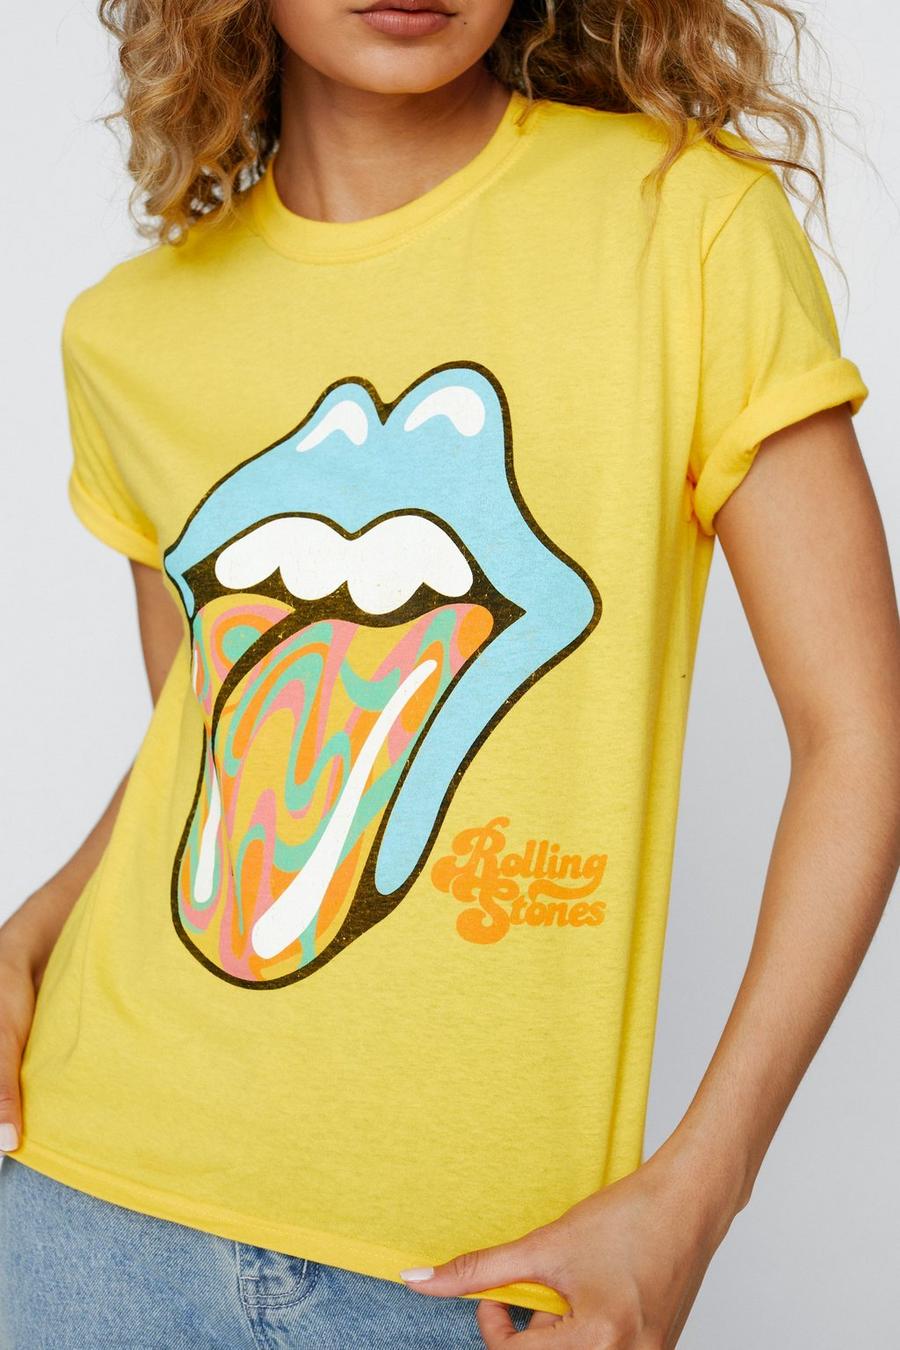 Rolling Stones Lips Fitted Graphic T-Shirt